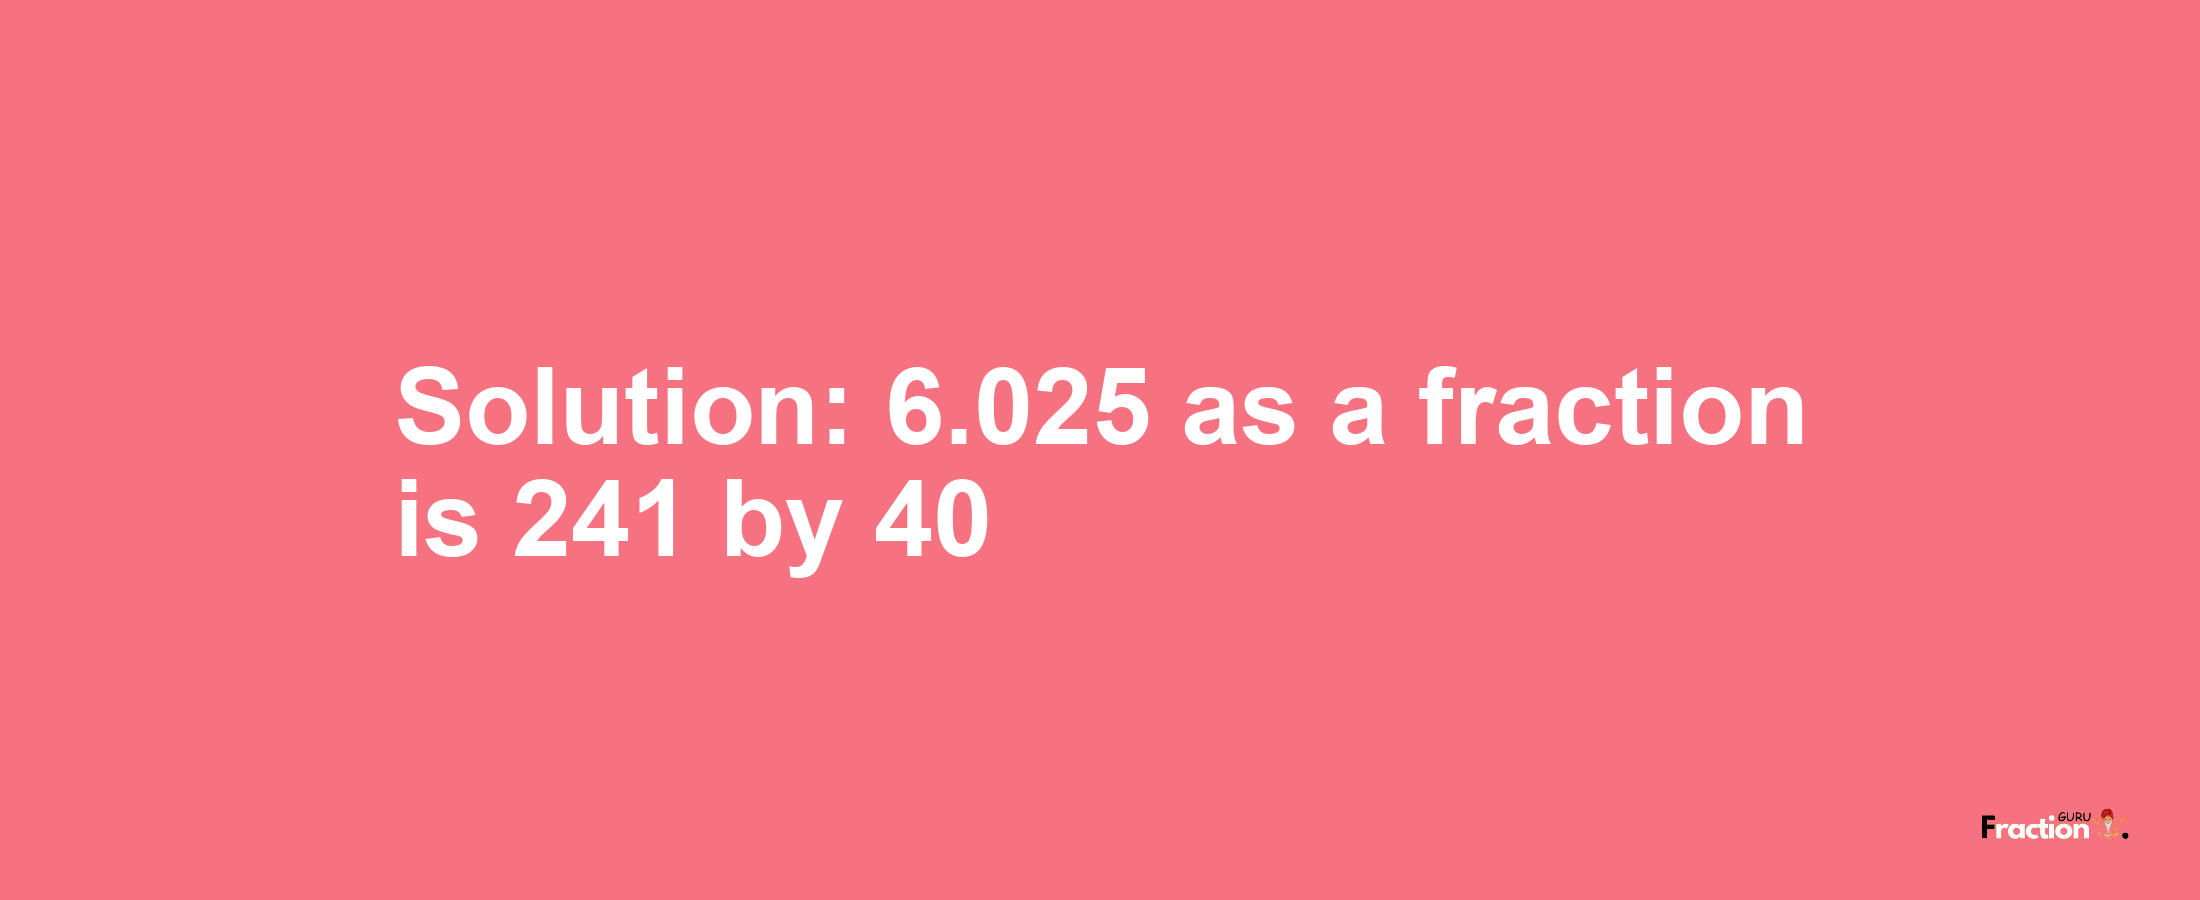 Solution:6.025 as a fraction is 241/40